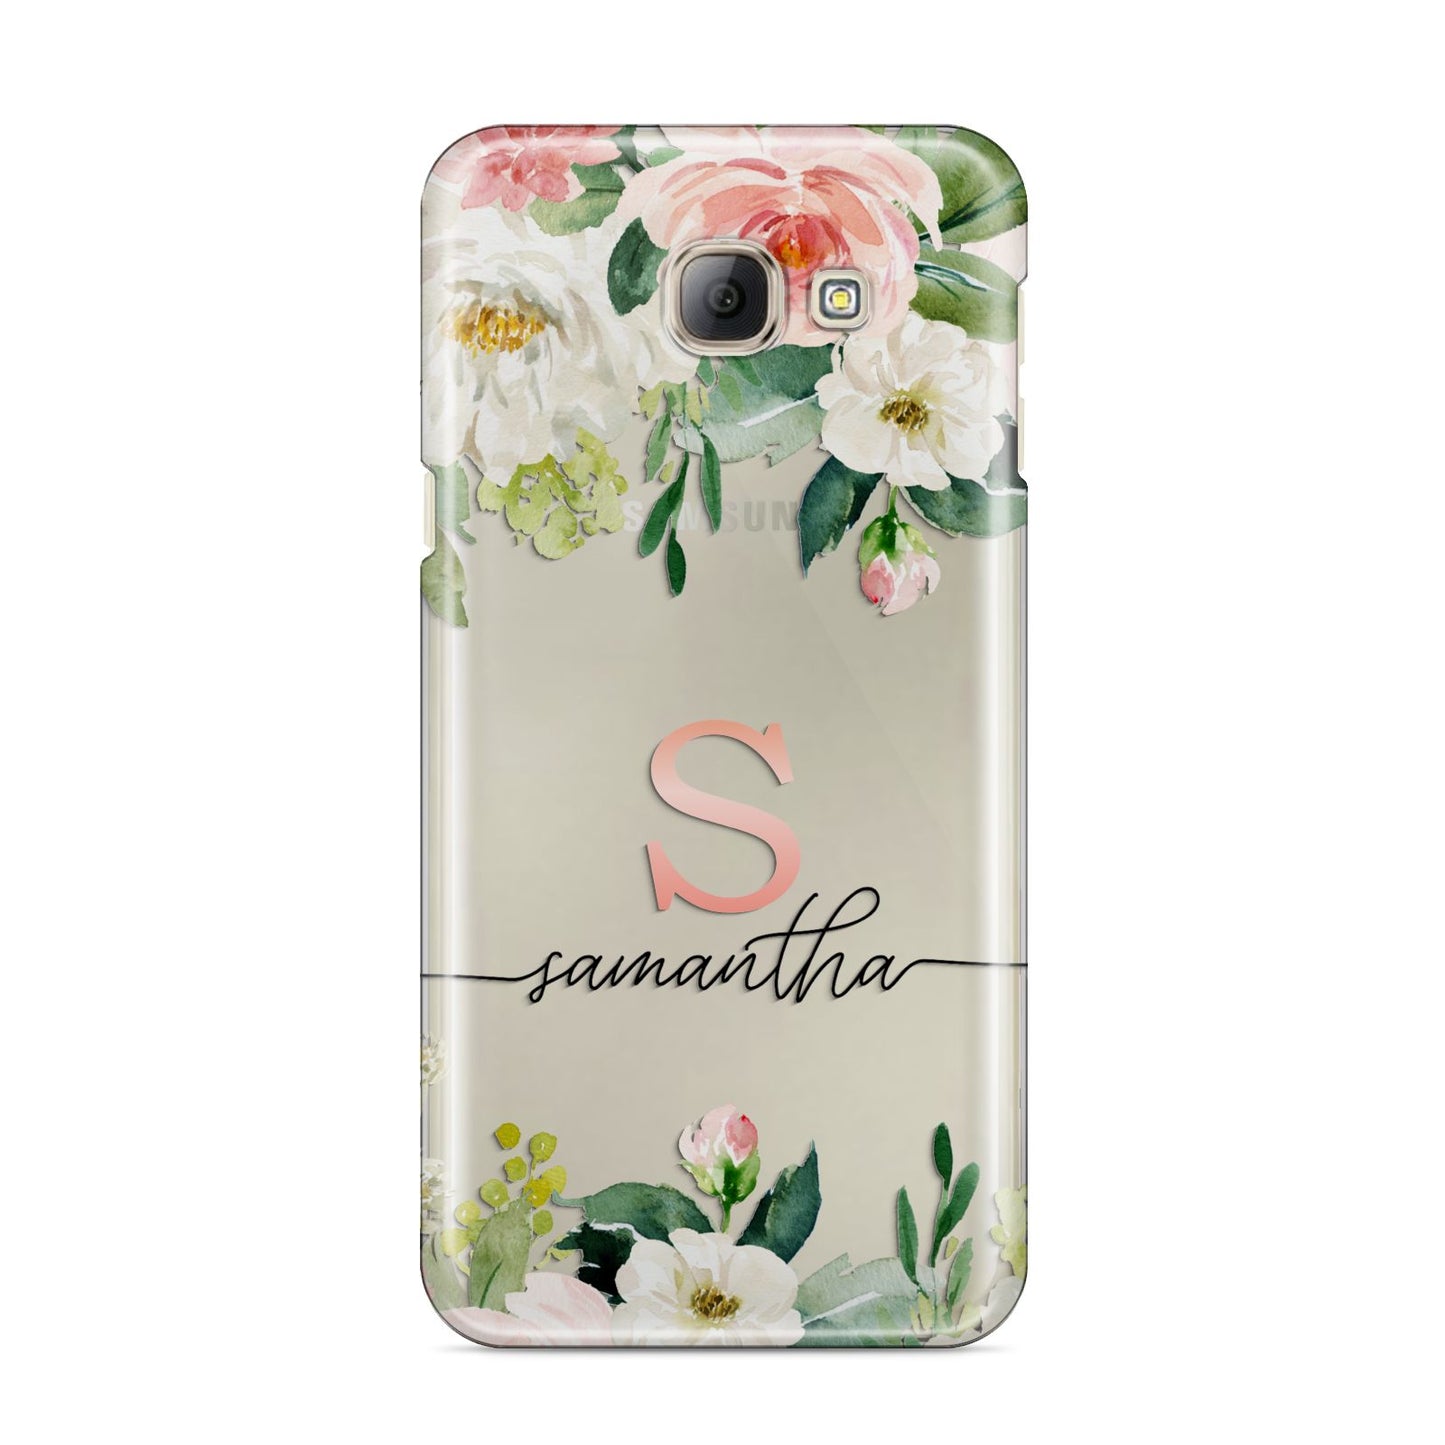 Monogrammed Floral Roses Samsung Galaxy A8 2016 Case